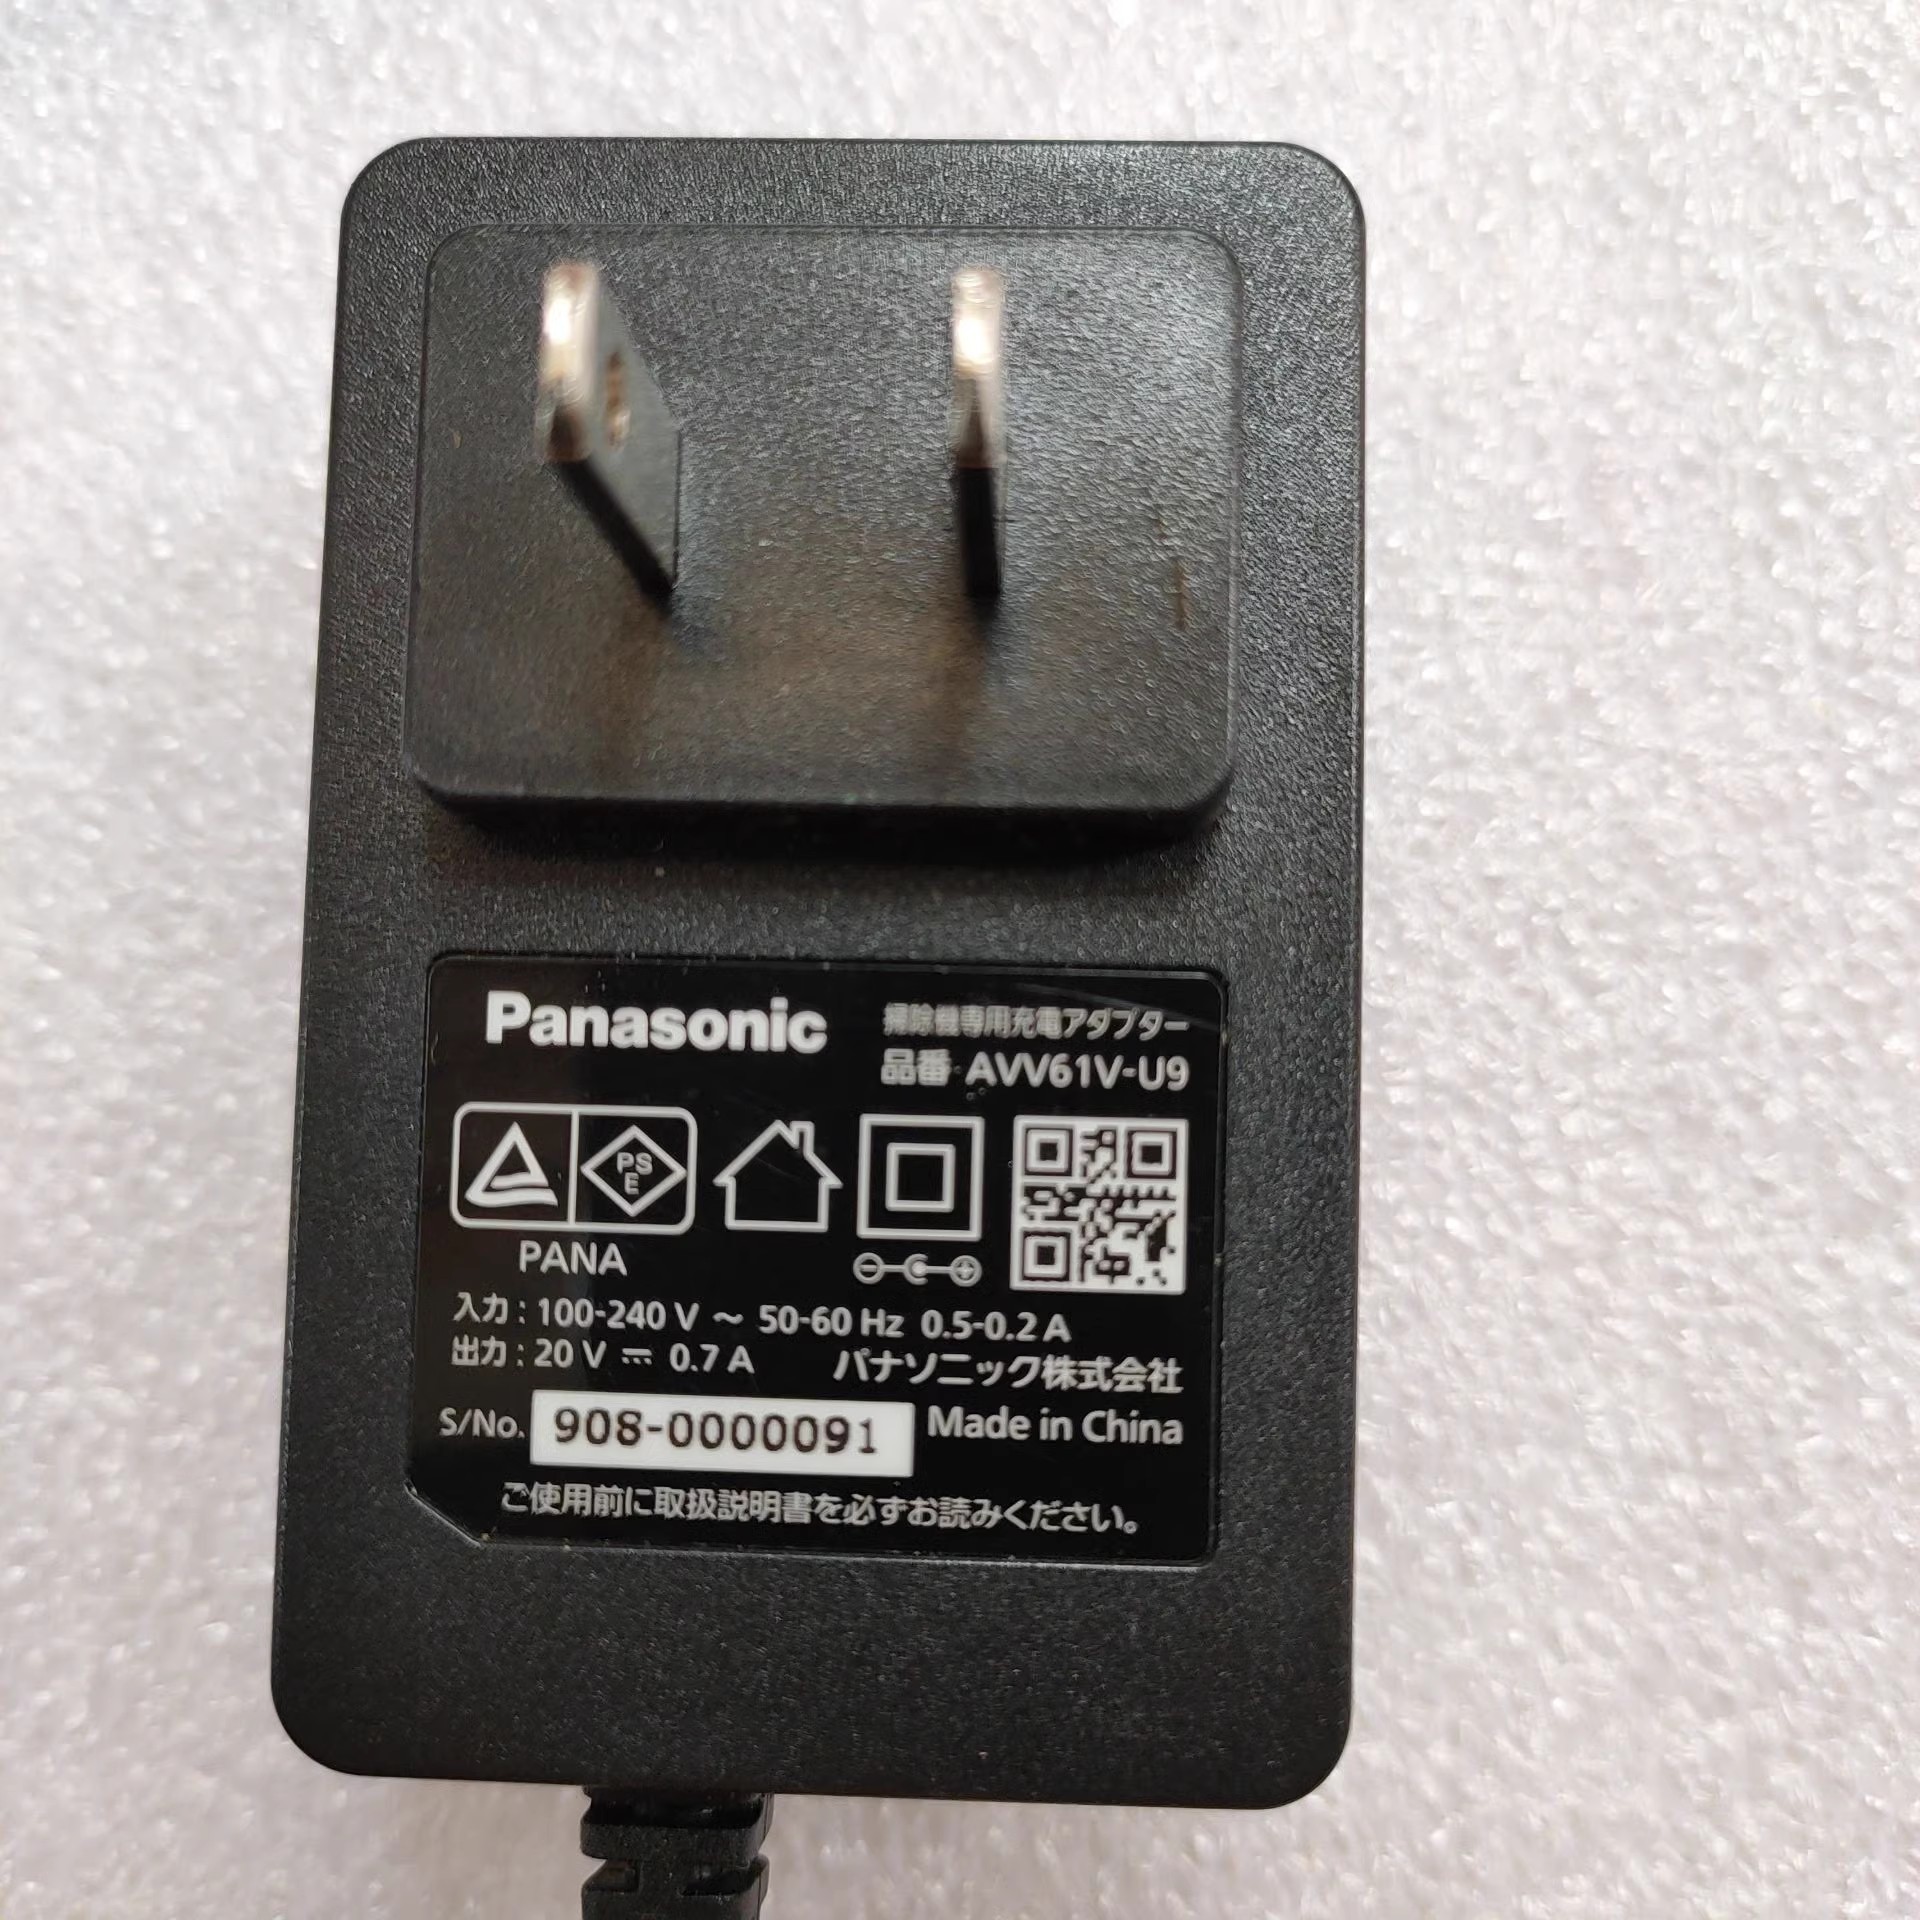 *Brand NEW* Panasonic AVV61V-U8 AVV61V-U9 20V 0.7A AC DC ADAPTHE POWER Supply - Click Image to Close